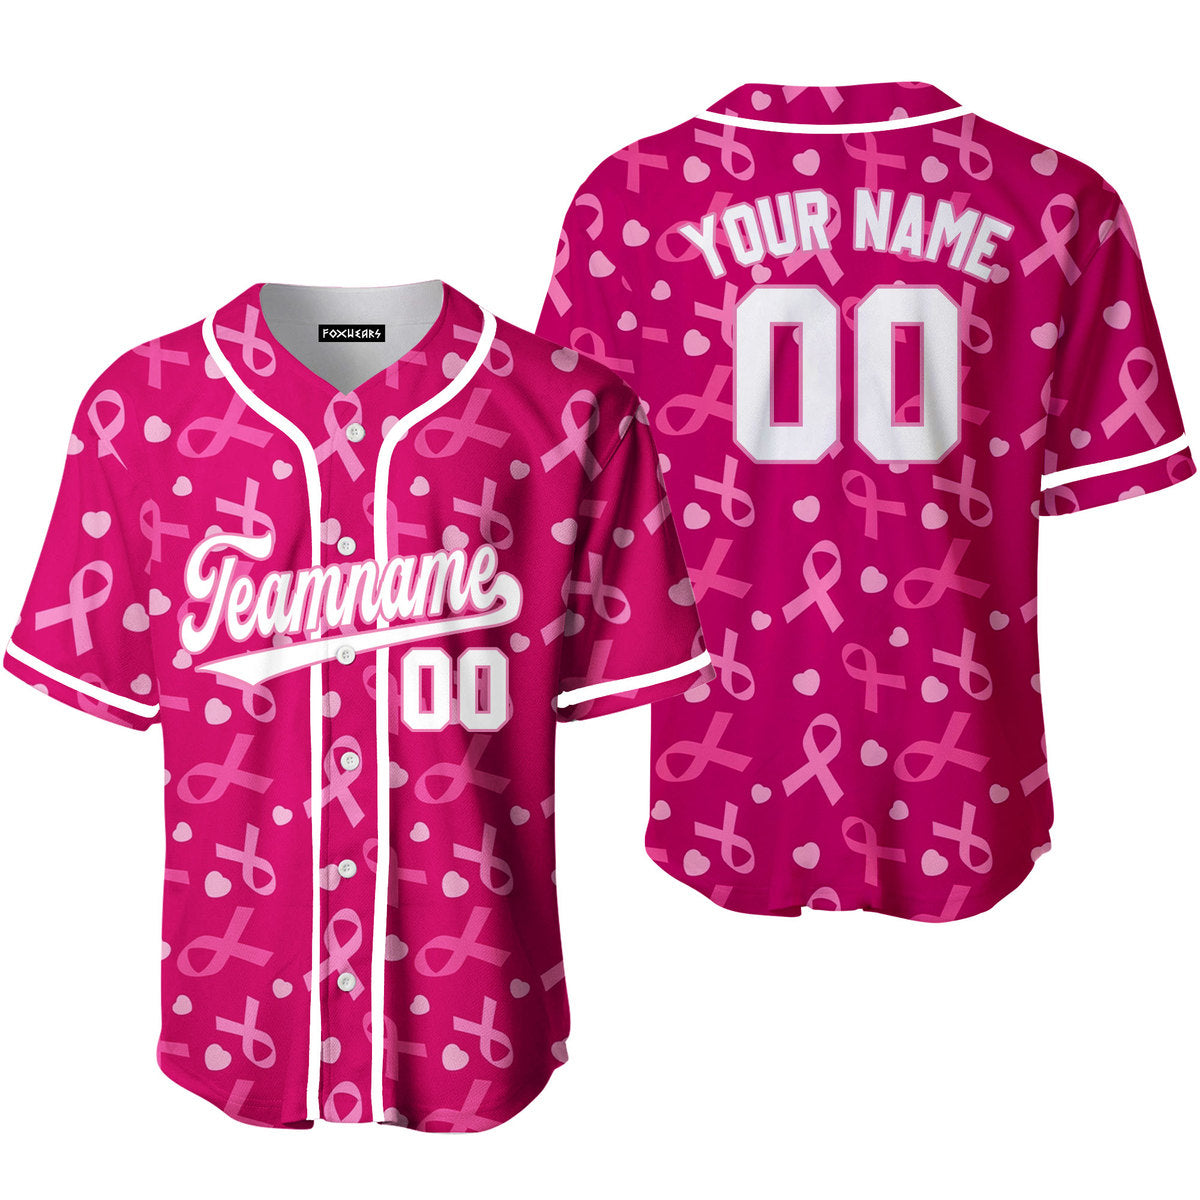 Personalized Breast Cancer Awareness White Pink Baseball Tee Jersey